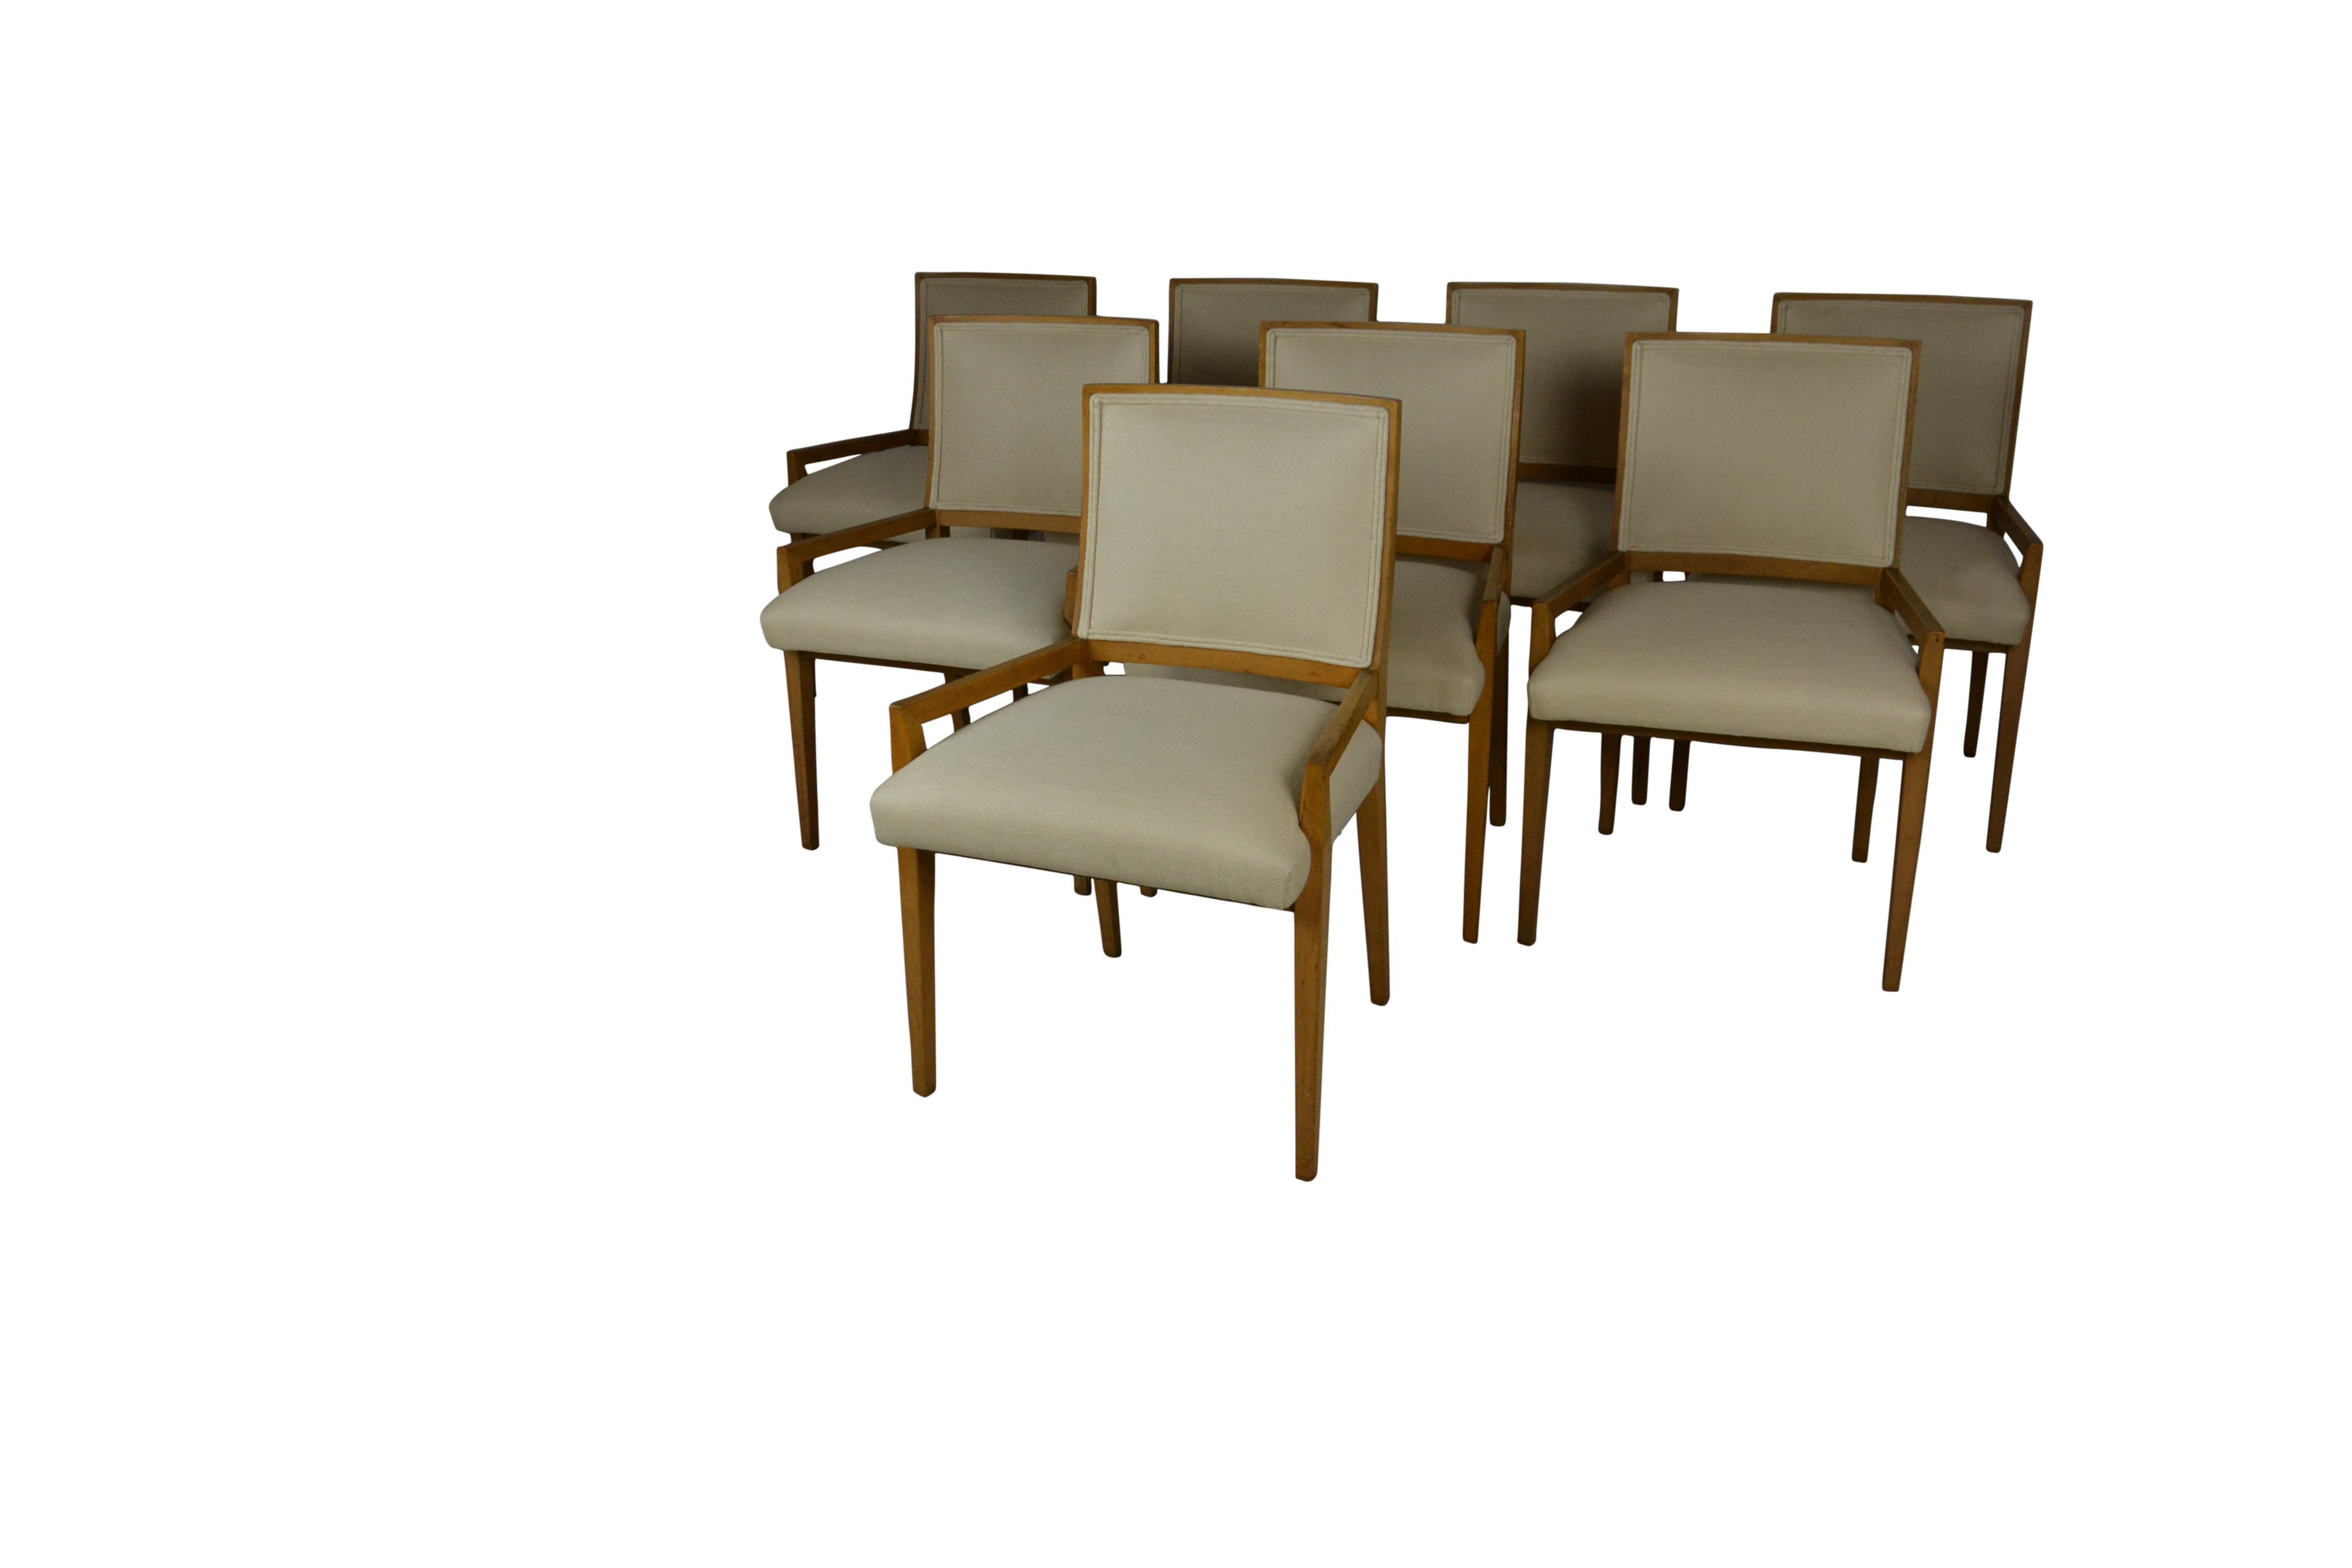 A set of 8 midcentury dining chairs in maple-wood. All new neutral color upholstery. Low arms on all.